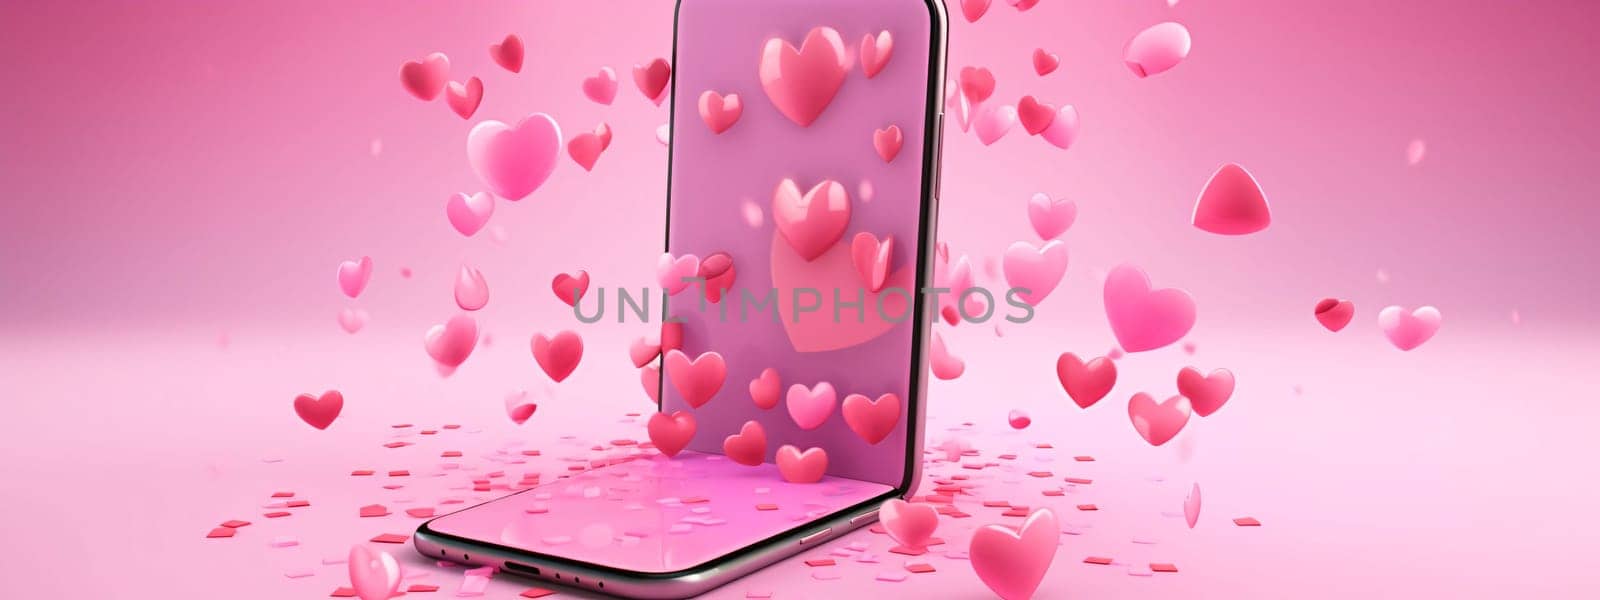 A contemporary concept depicting love and technology with hearts emanating from a smartphone on a pink backdrop.